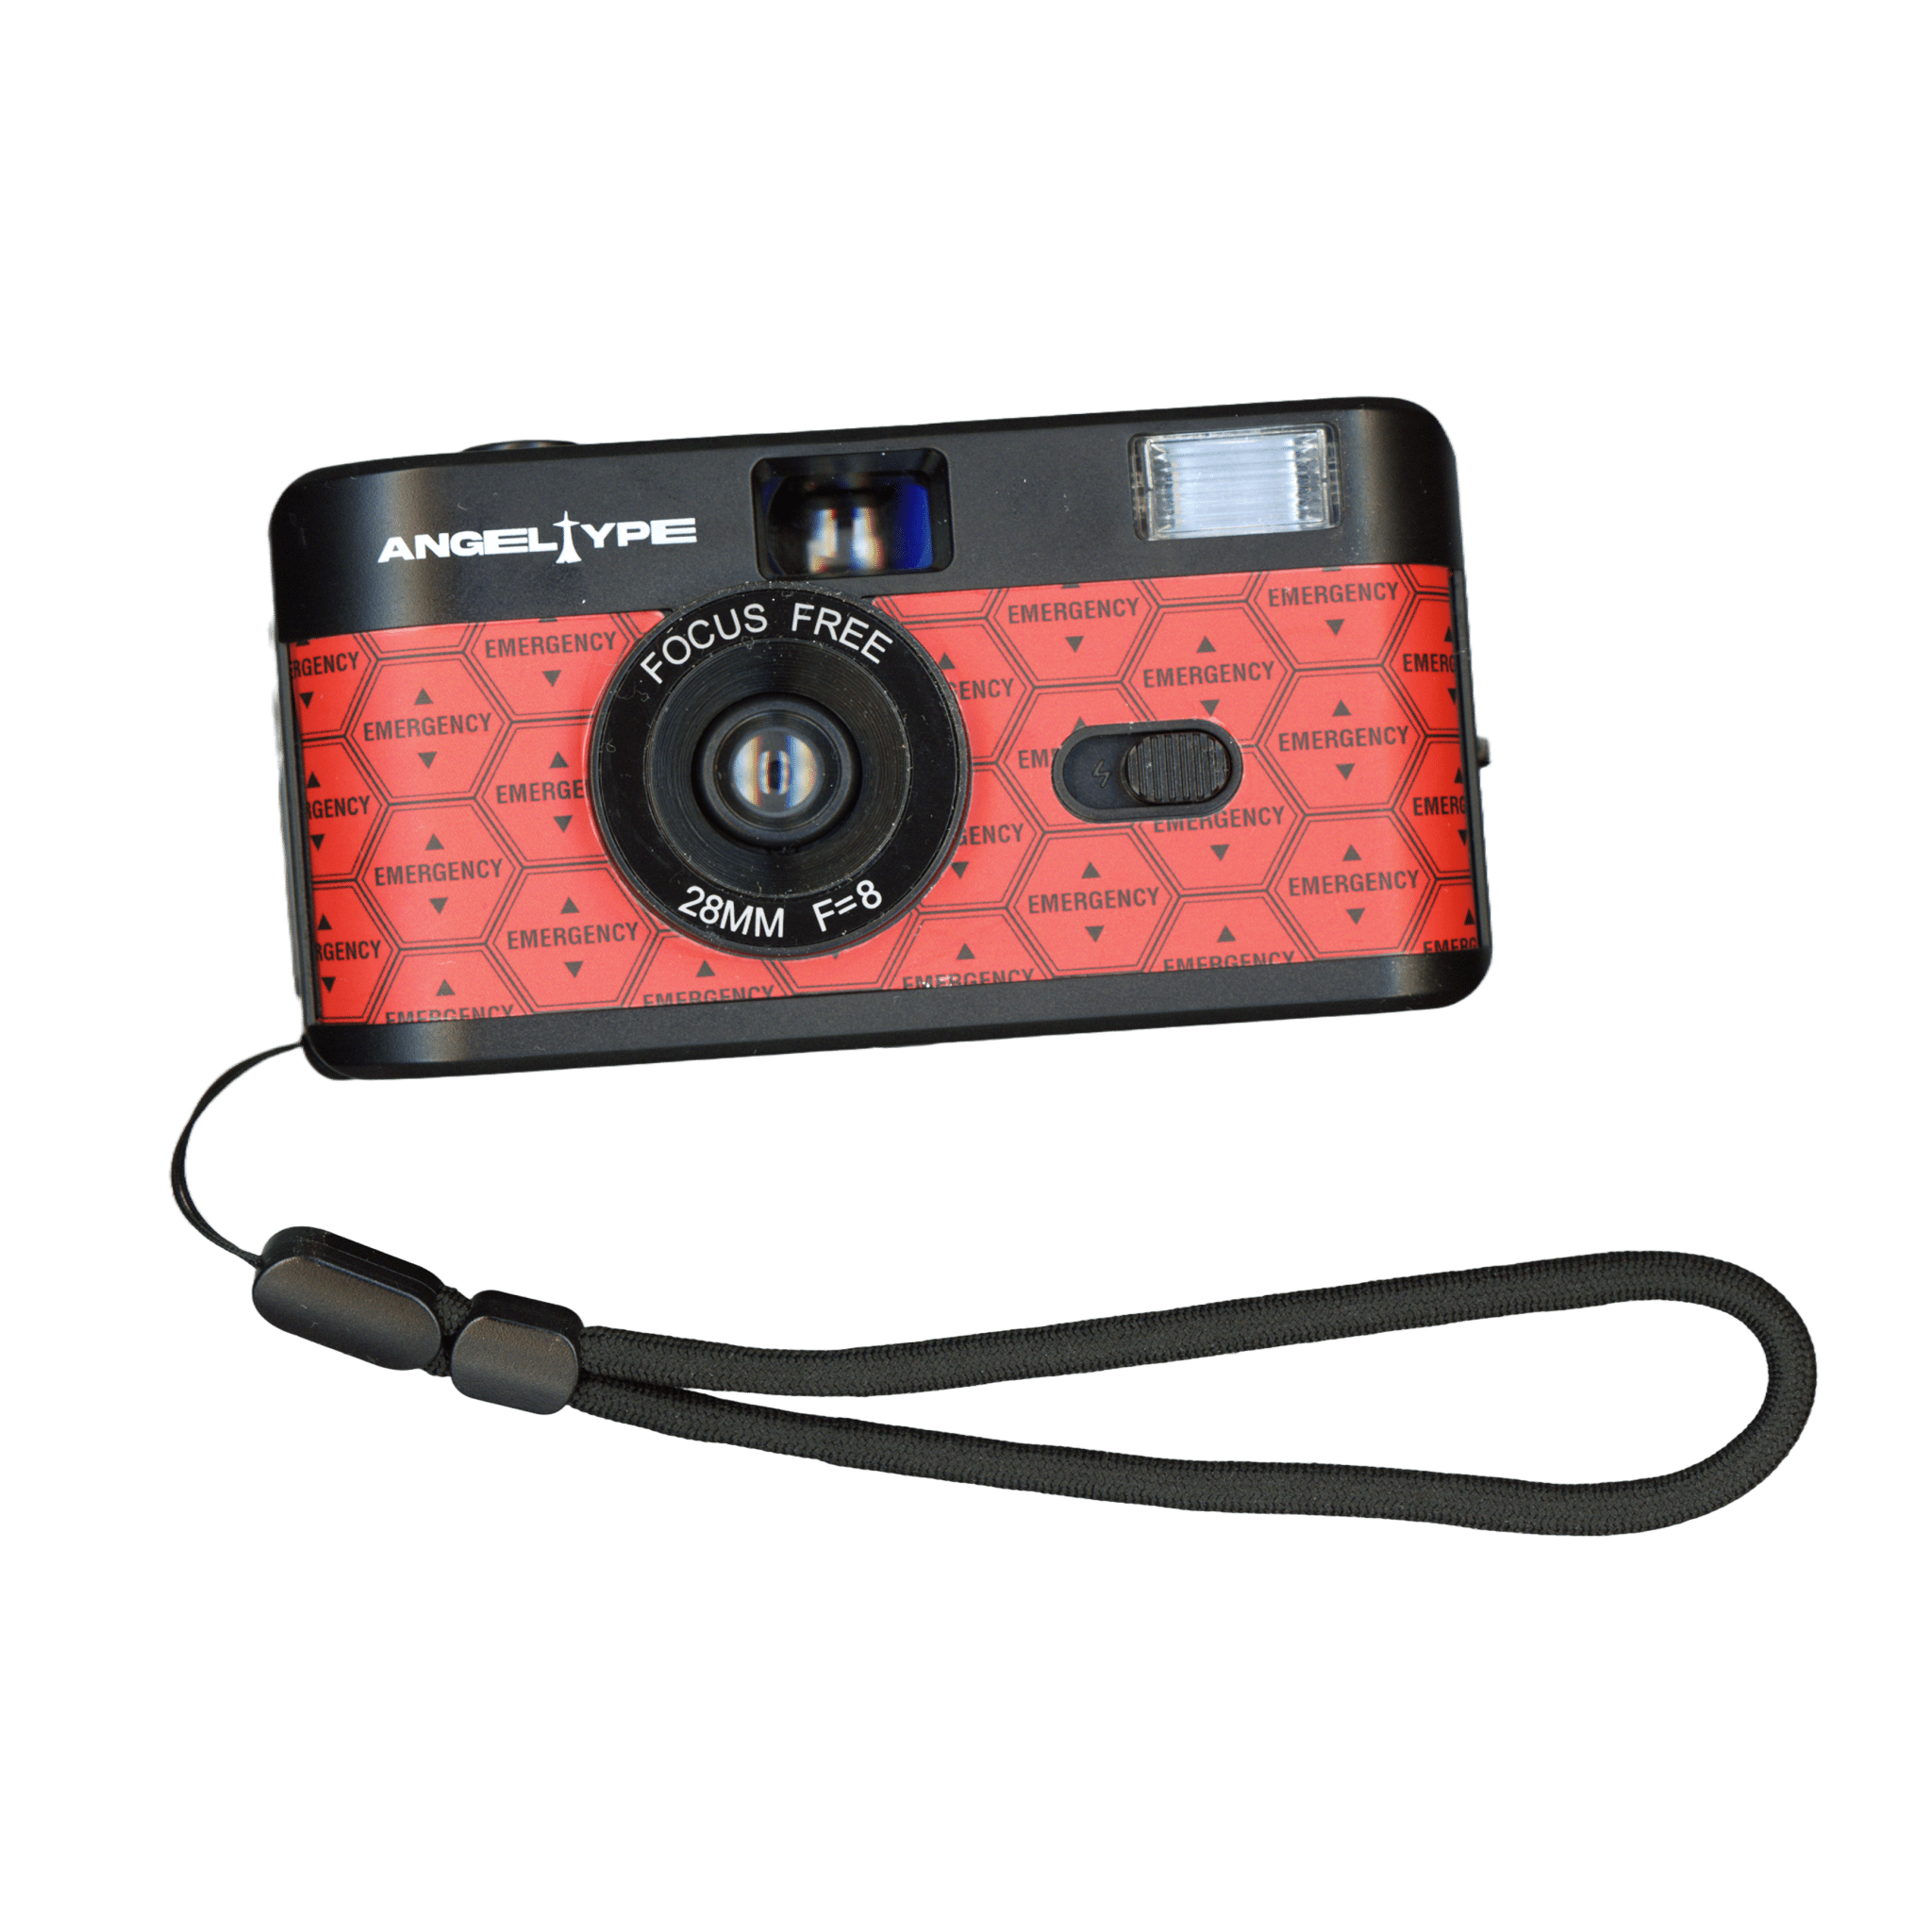 EMERGENCY REUSABLE 35MM CAMERA - angeltype